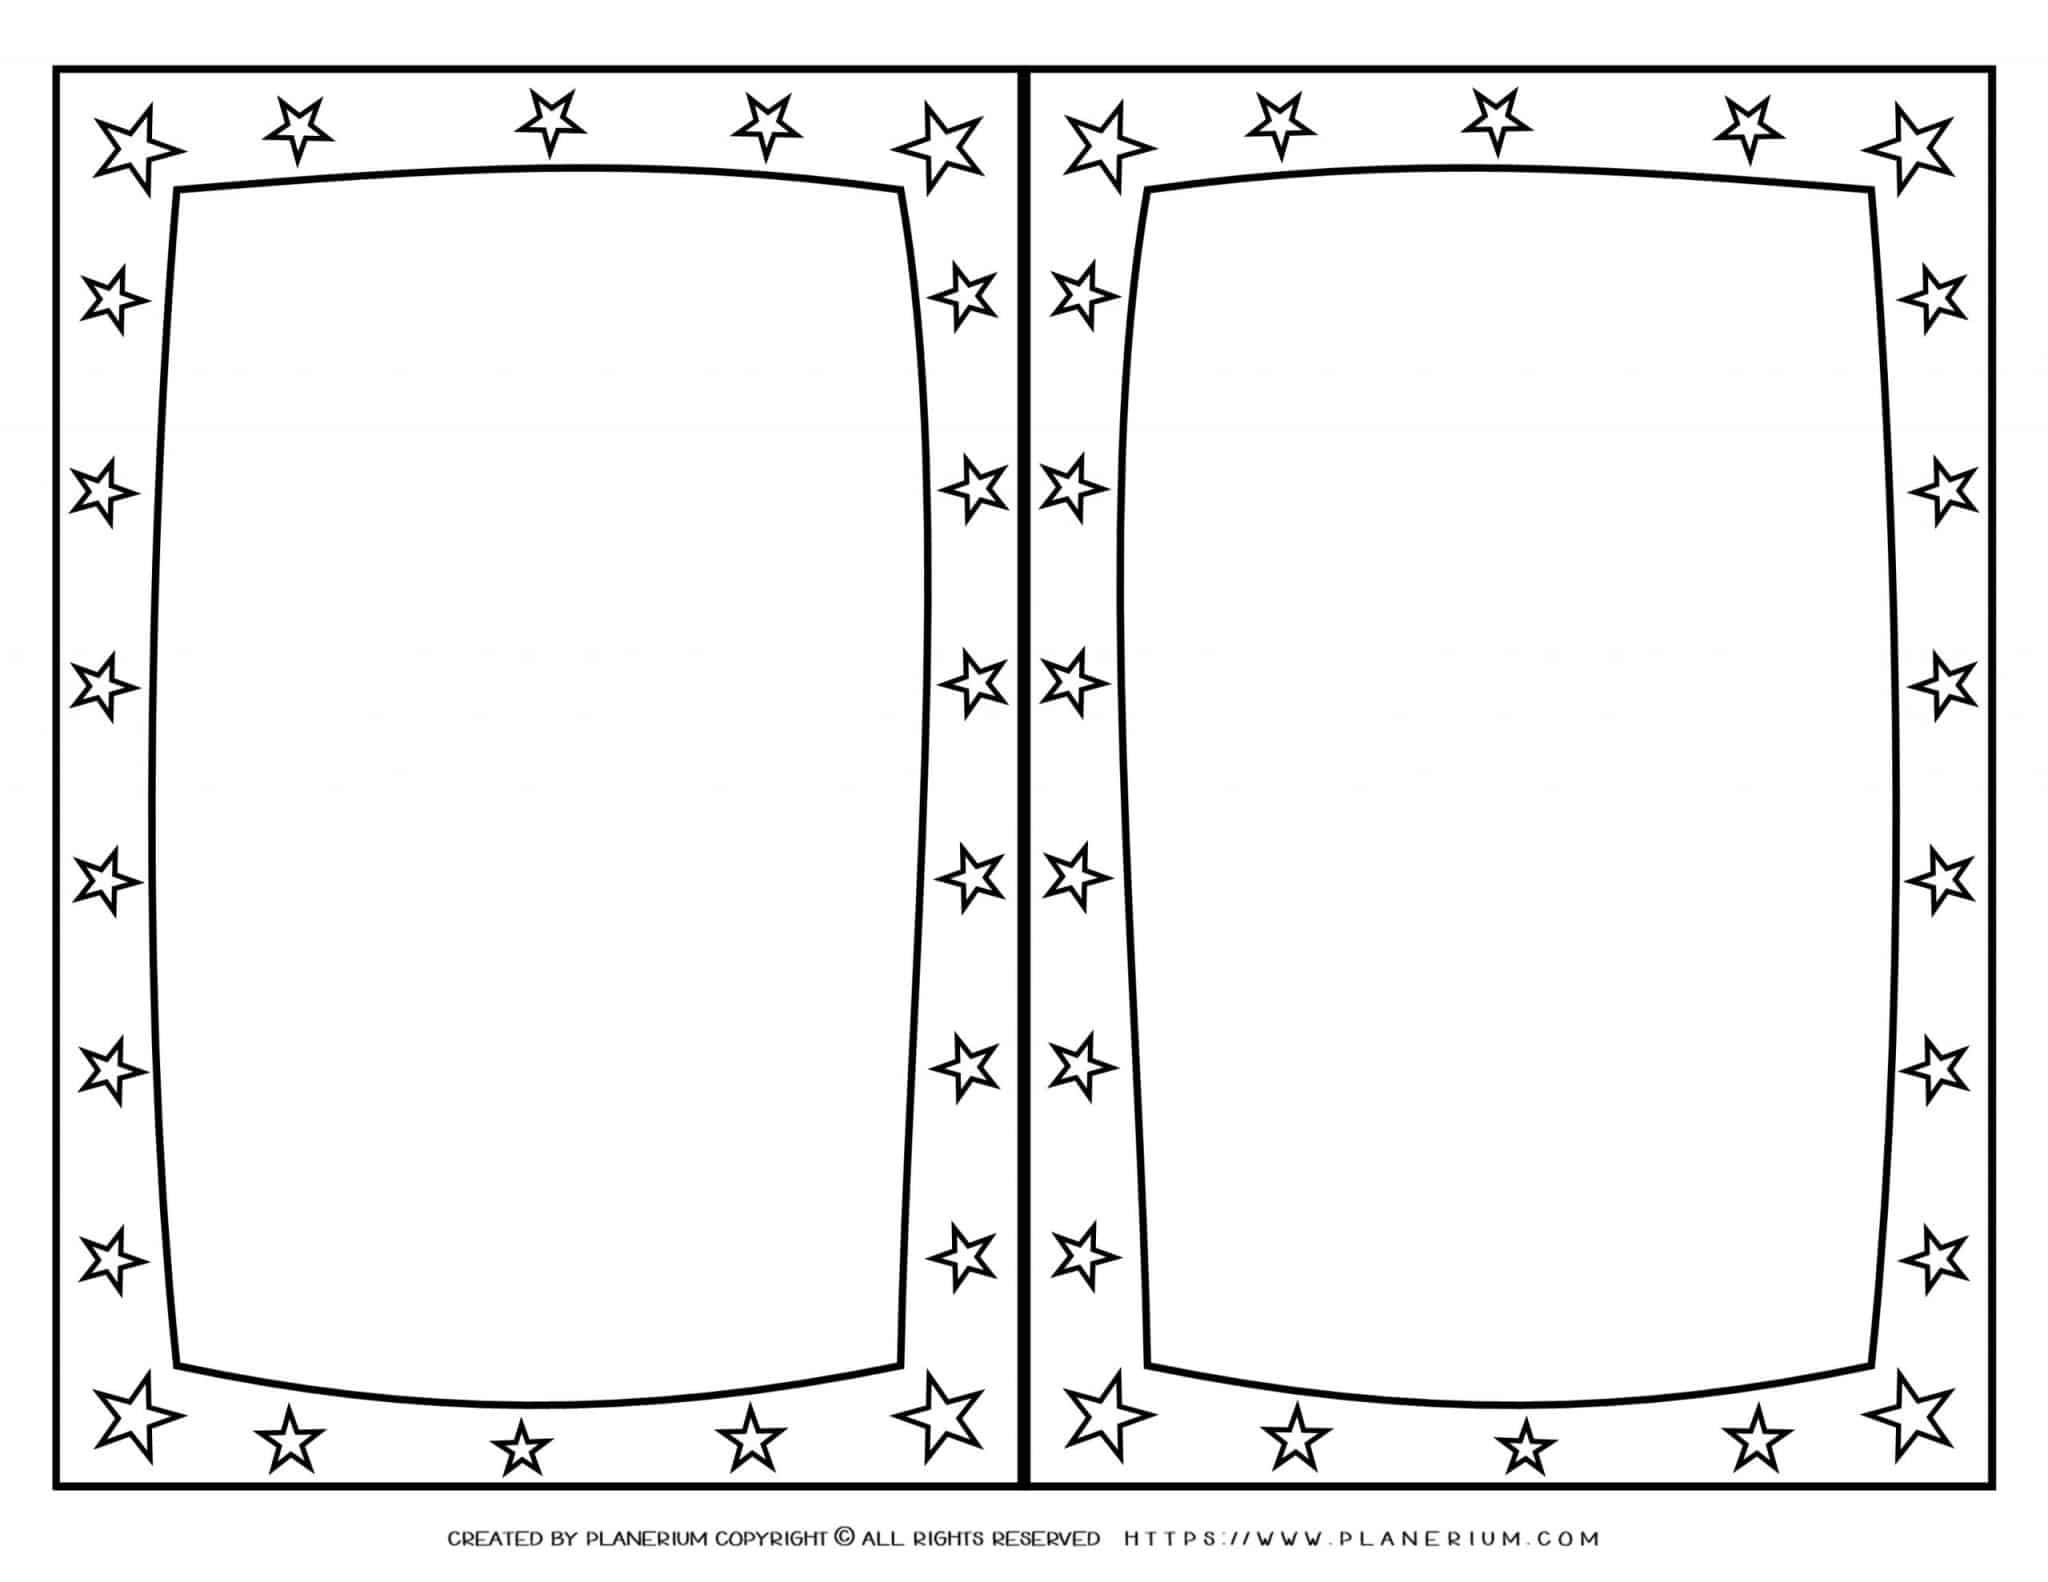 Mother's Day - Coloring Page - Greeting Stars Frame